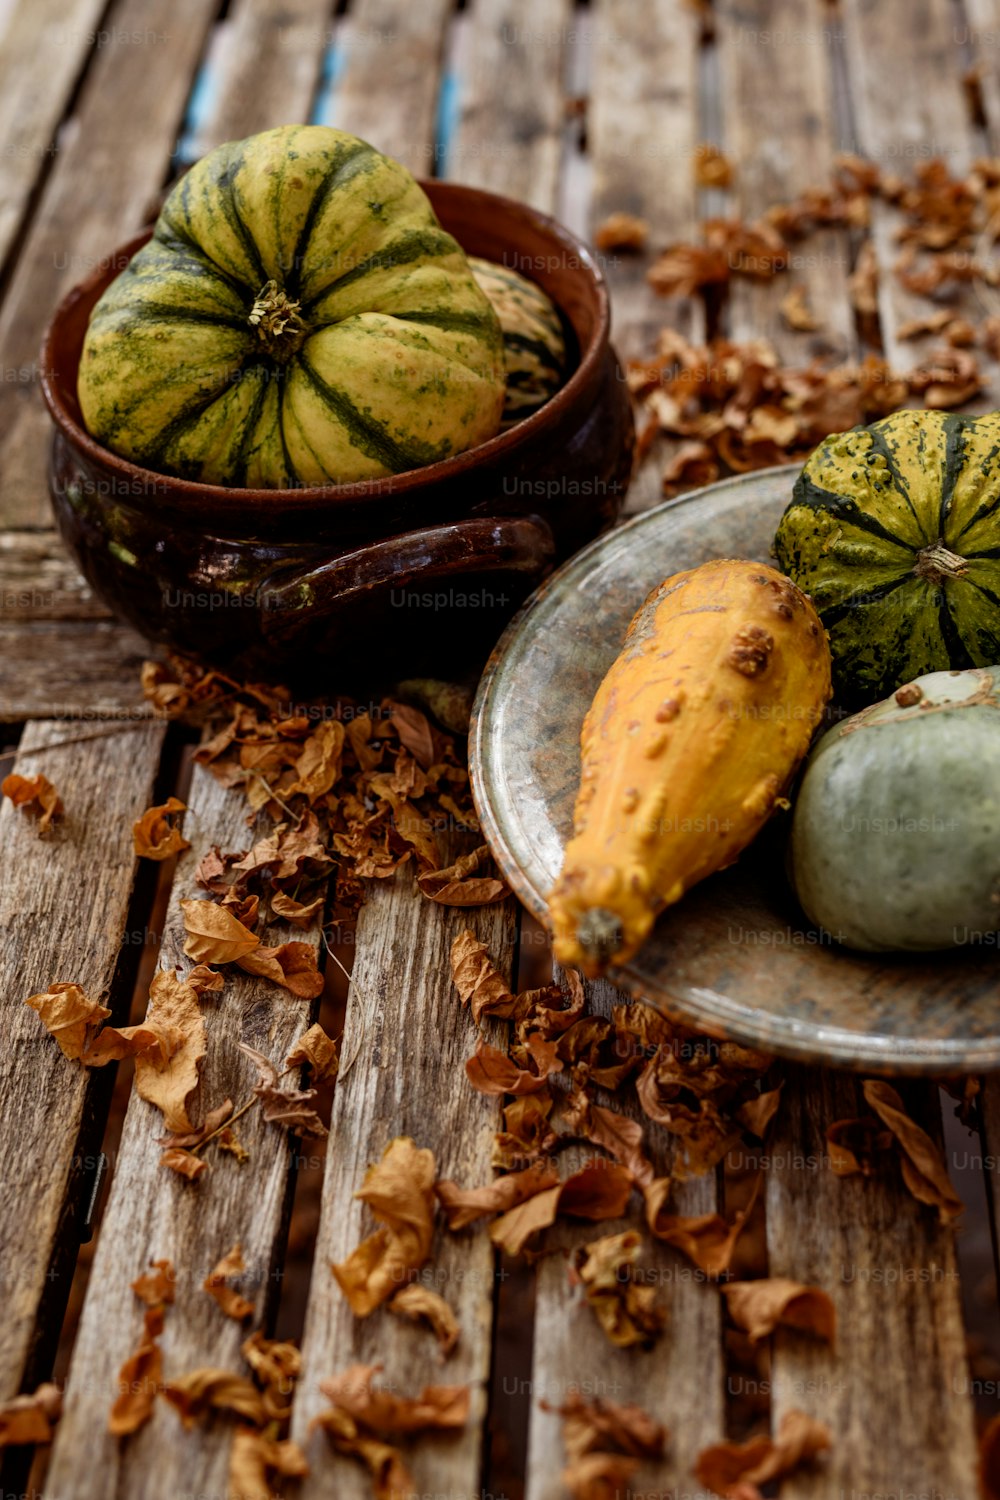 a plate of squash and gourds on a wooden table